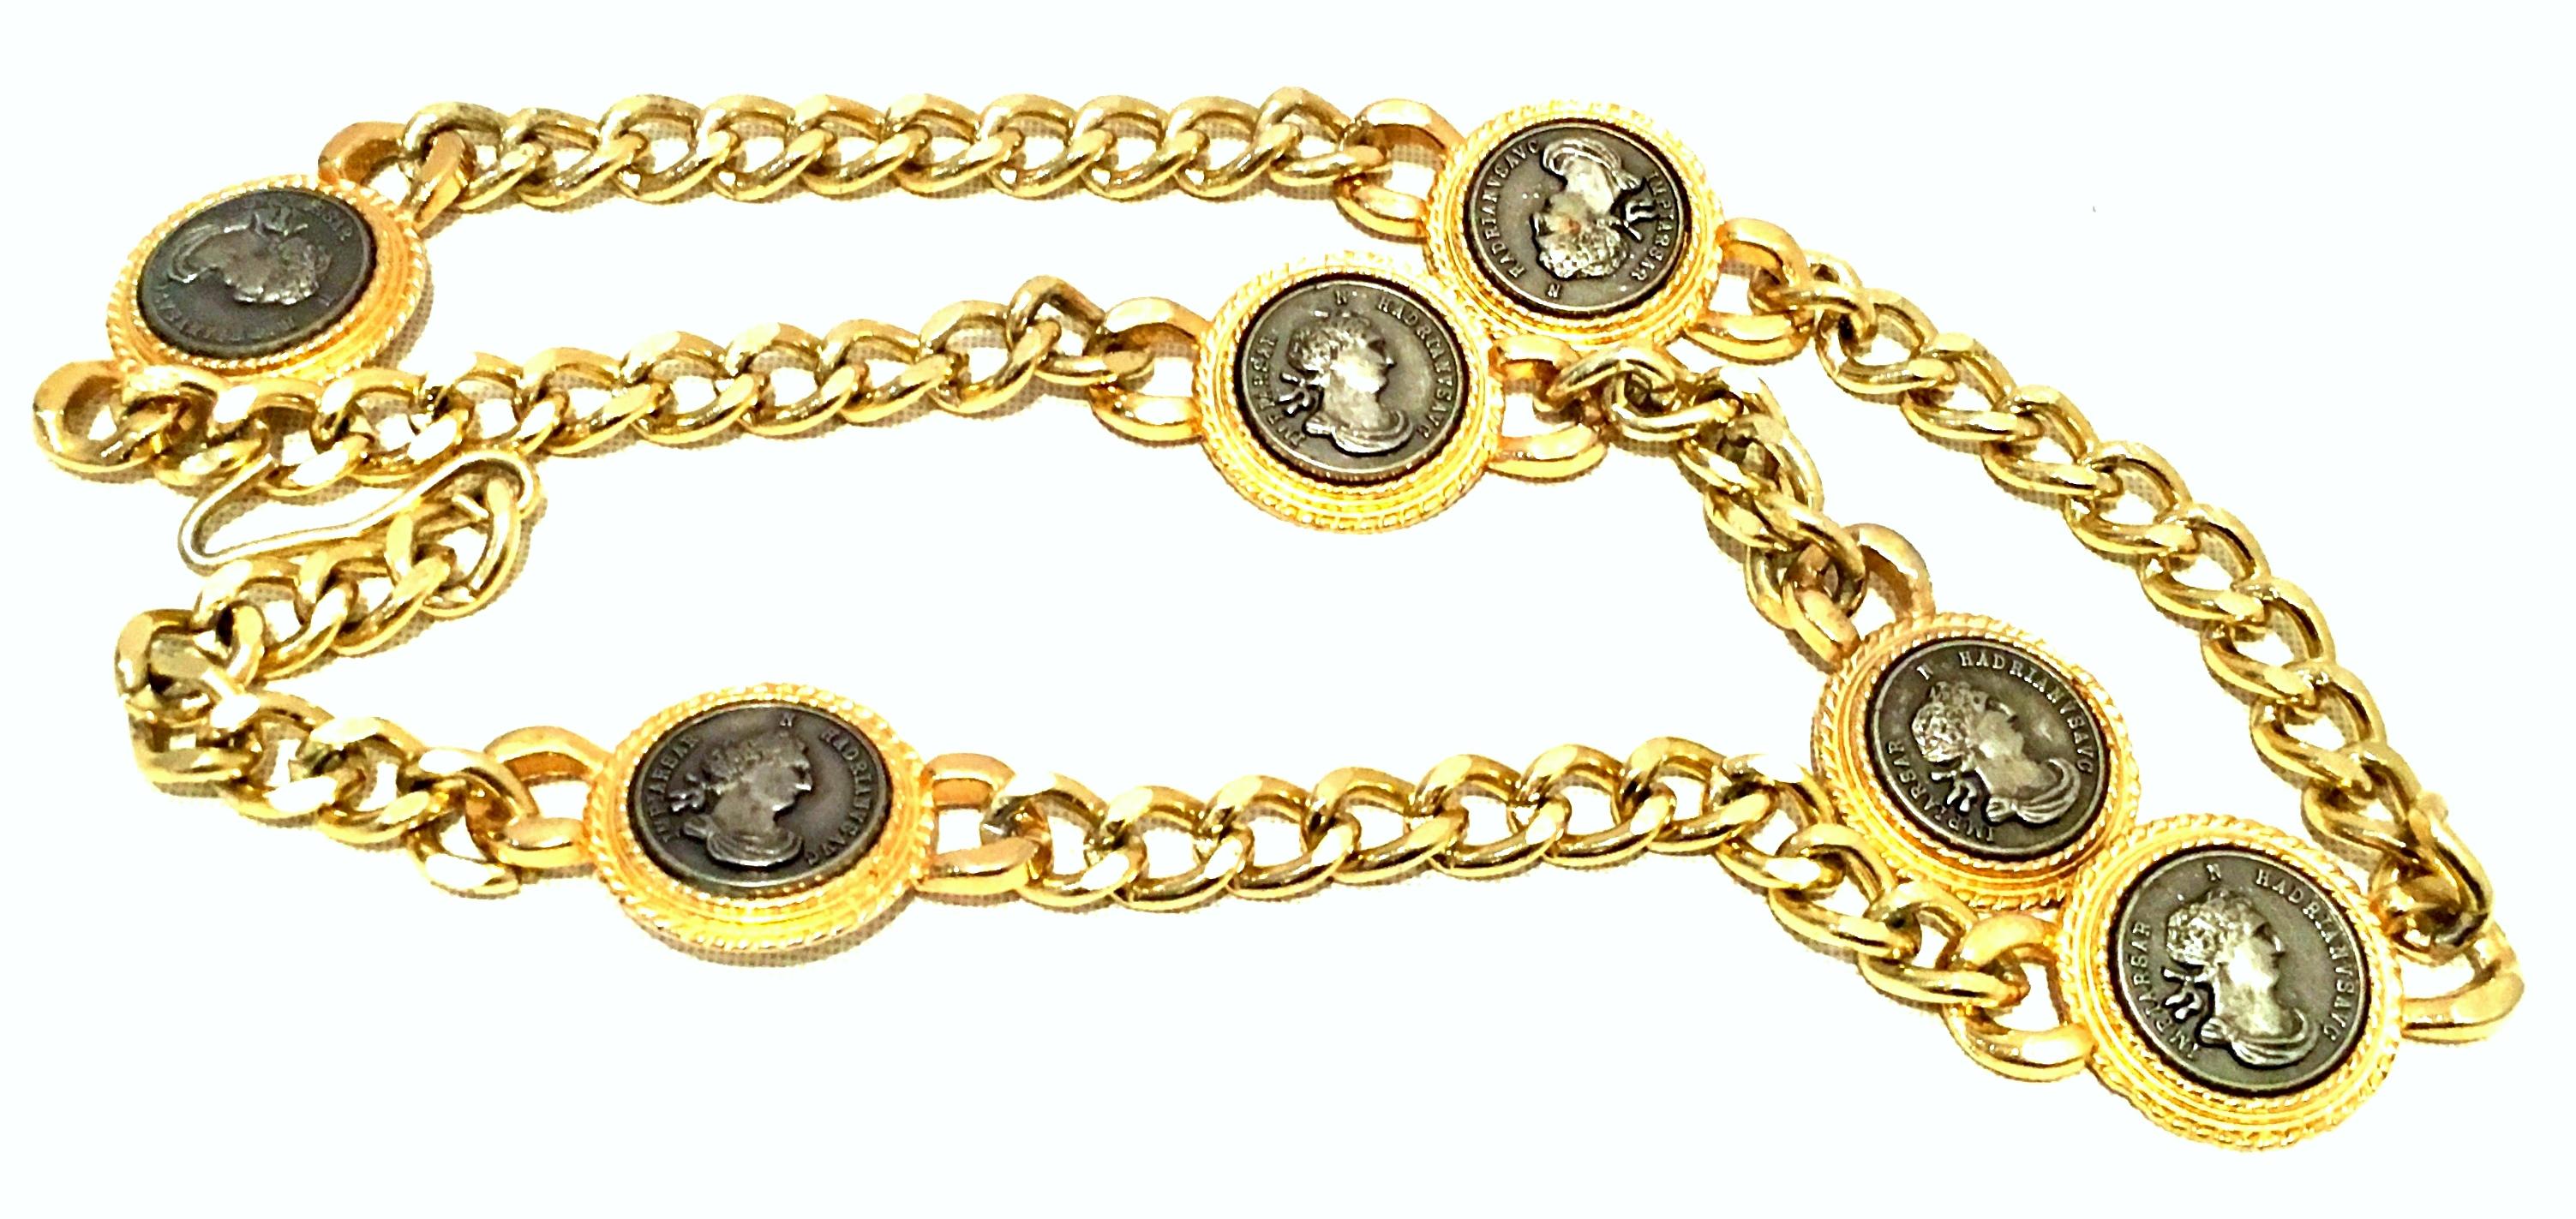 1980'S Gold Plate Chain Link & Roman Coin Medallion Belt Or Necklace By, Omega. Features, Five, 1.5